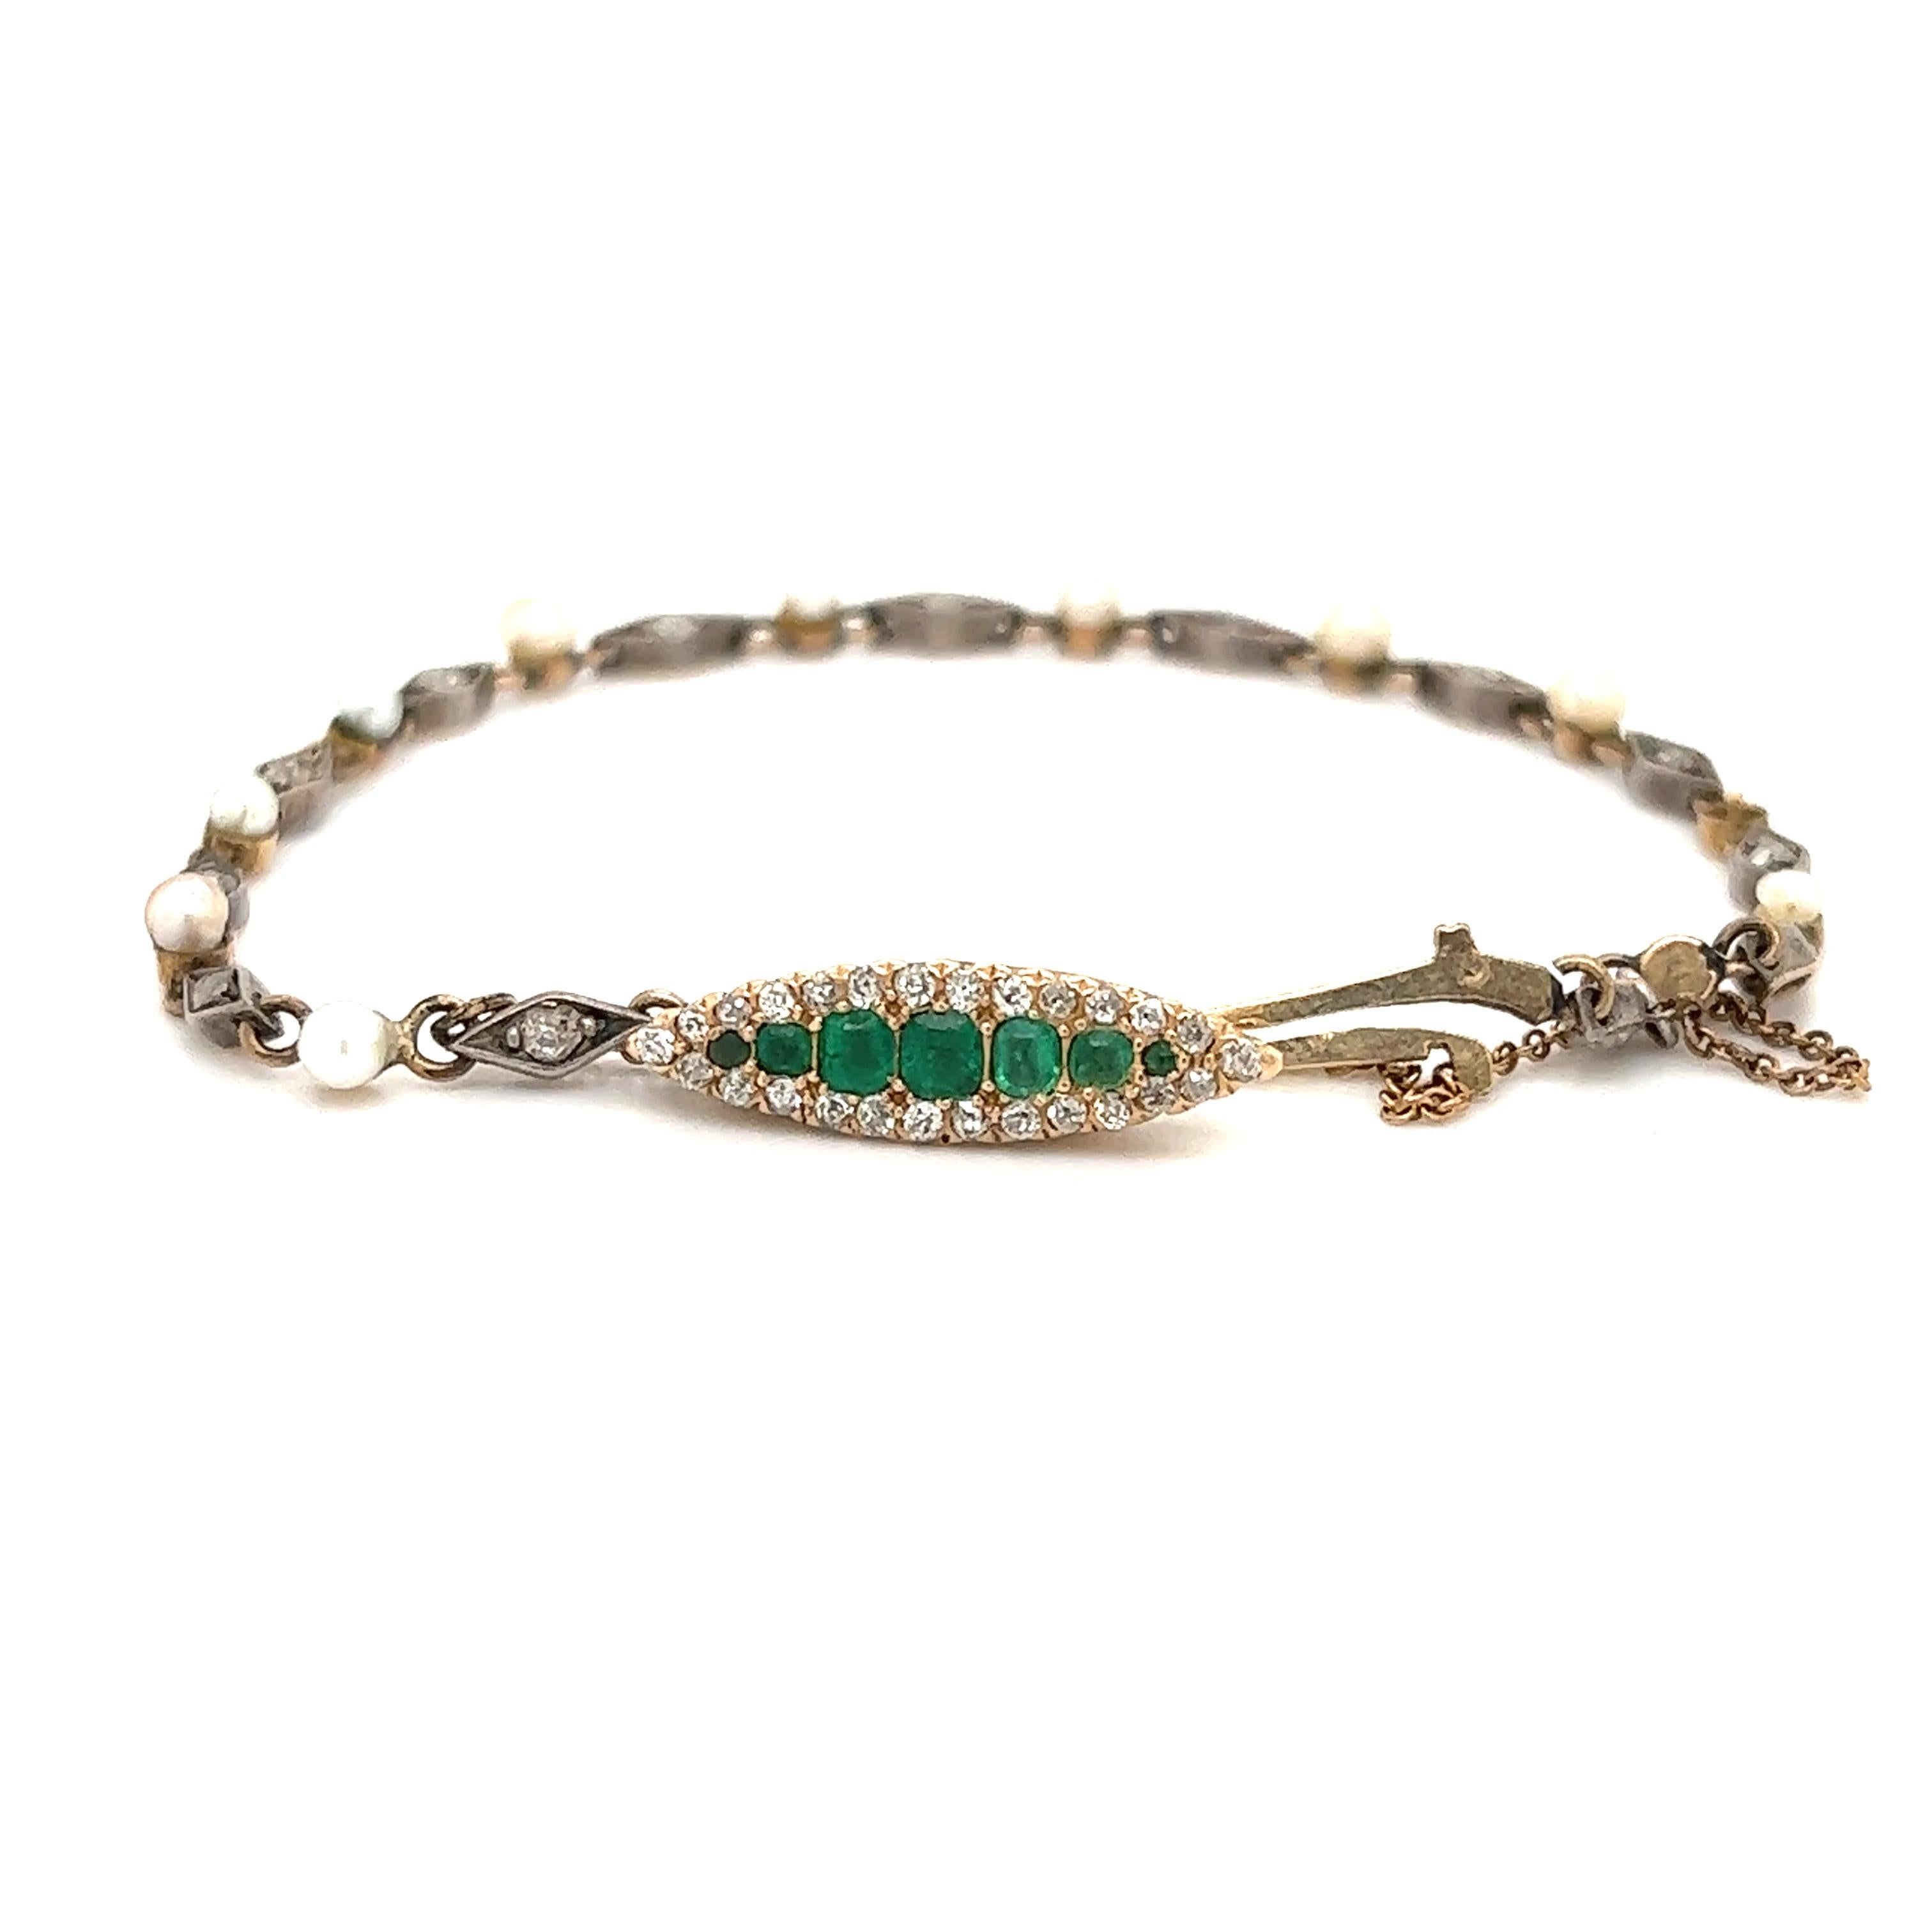 Equisite details seen on this beautiful Edwardian era bracelet. The bracelet is crafted in gold & silver. The focal point of the bracelet is the center navette station which is set with old mine cut diamonds and emerald gemstones. The diamonds &